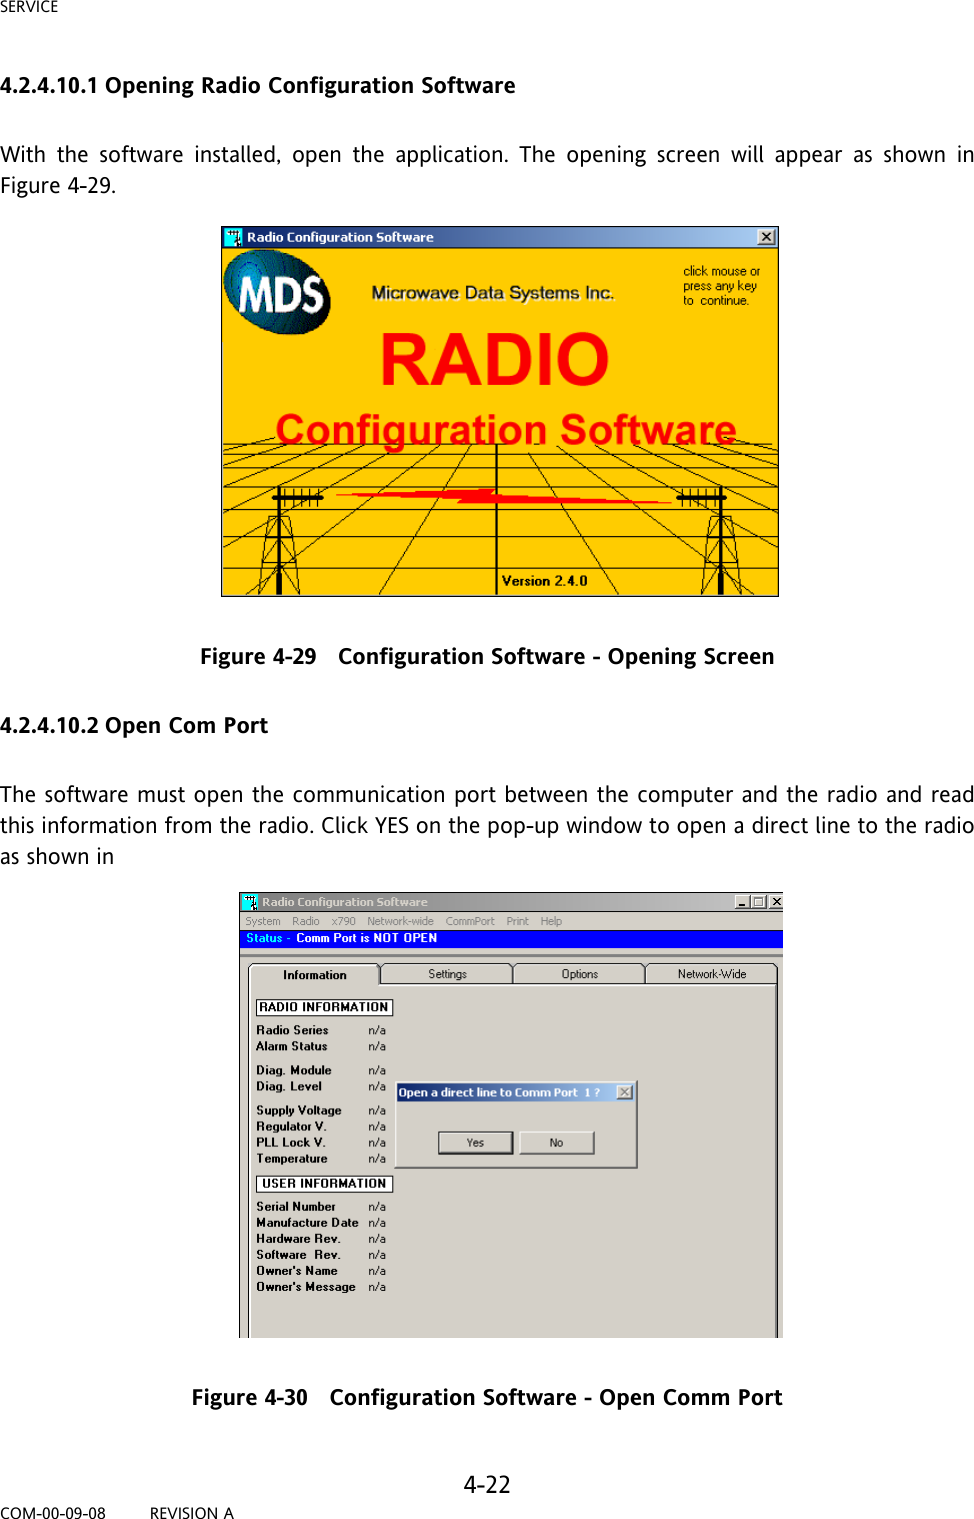 SERVICE     4-22 COM-00-09-08         REVISION A 4.2.4.10.1 Opening Radio Configuration Software  With the software installed, open the application. The opening screen will appear as shown in Figure 4-29.  Figure 4-29   Configuration Software - Opening Screen 4.2.4.10.2 Open Com Port  The software must open the communication port between the computer and the radio and read this information from the radio. Click YES on the pop-up window to open a direct line to the radio as shown in   Figure 4-30   Configuration Software - Open Comm Port  